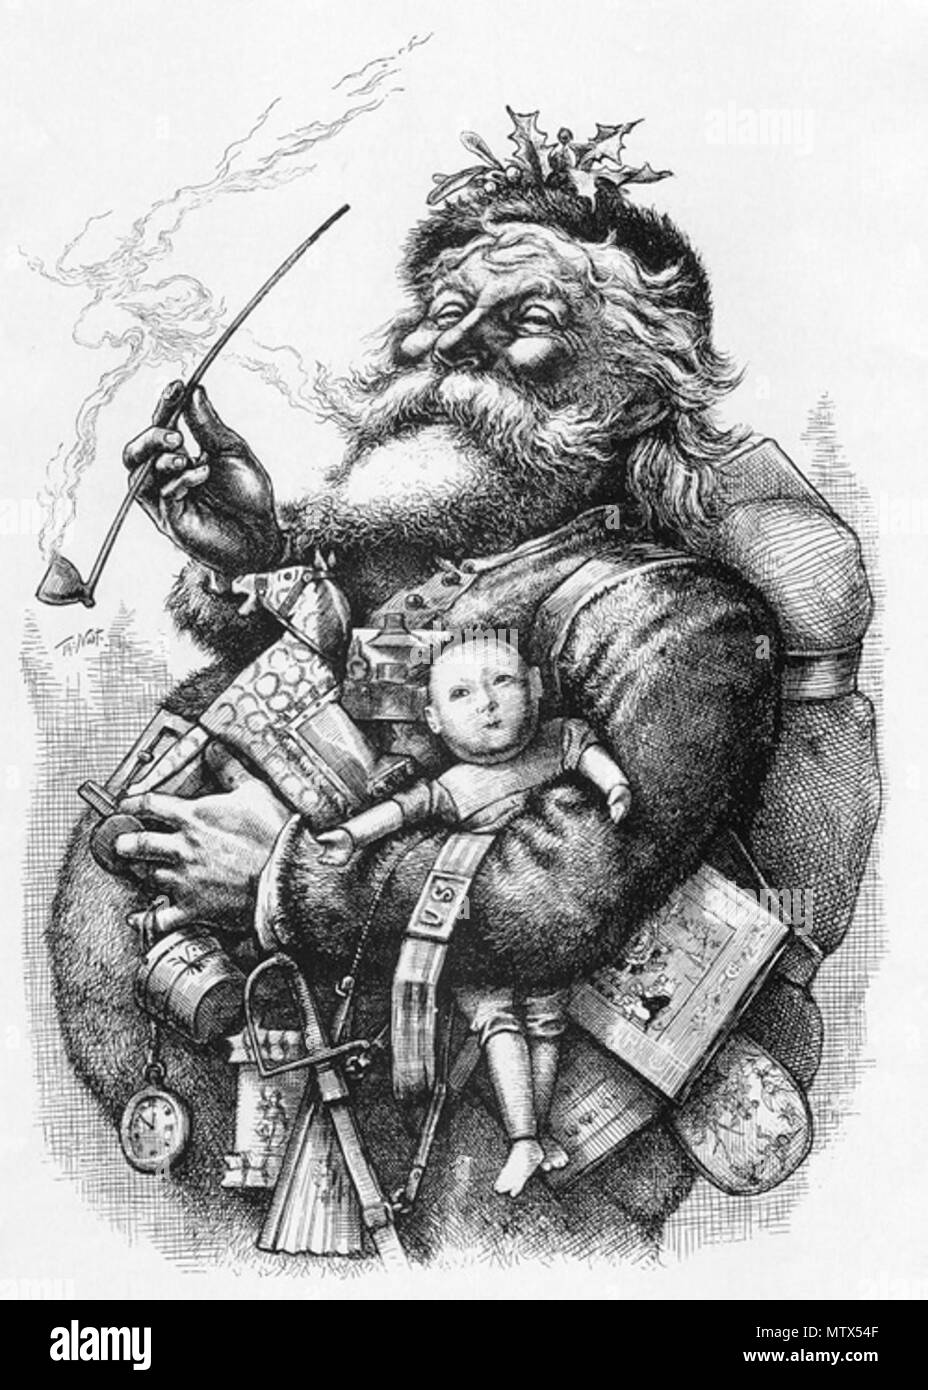 . English: Thomas Nast's most famous drawing, 'Merry Old Santa Claus', from the January 1, 1881 edition of Harper's Weekly. Thomas Nast immortalized Santa Claus' current look with an initial illustration in an 1863 issue of Harper's Weekly, as part of a large illustration titled 'A Christmas Furlough' in which Nast set aside his regular news and political coverage to do a Santa Claus drawing. The popularity of that image prompted him to create another illustration in 1881. 1 January 1881. Thomas Nast 438 Nast Santa cropped, 1881 Stock Photo